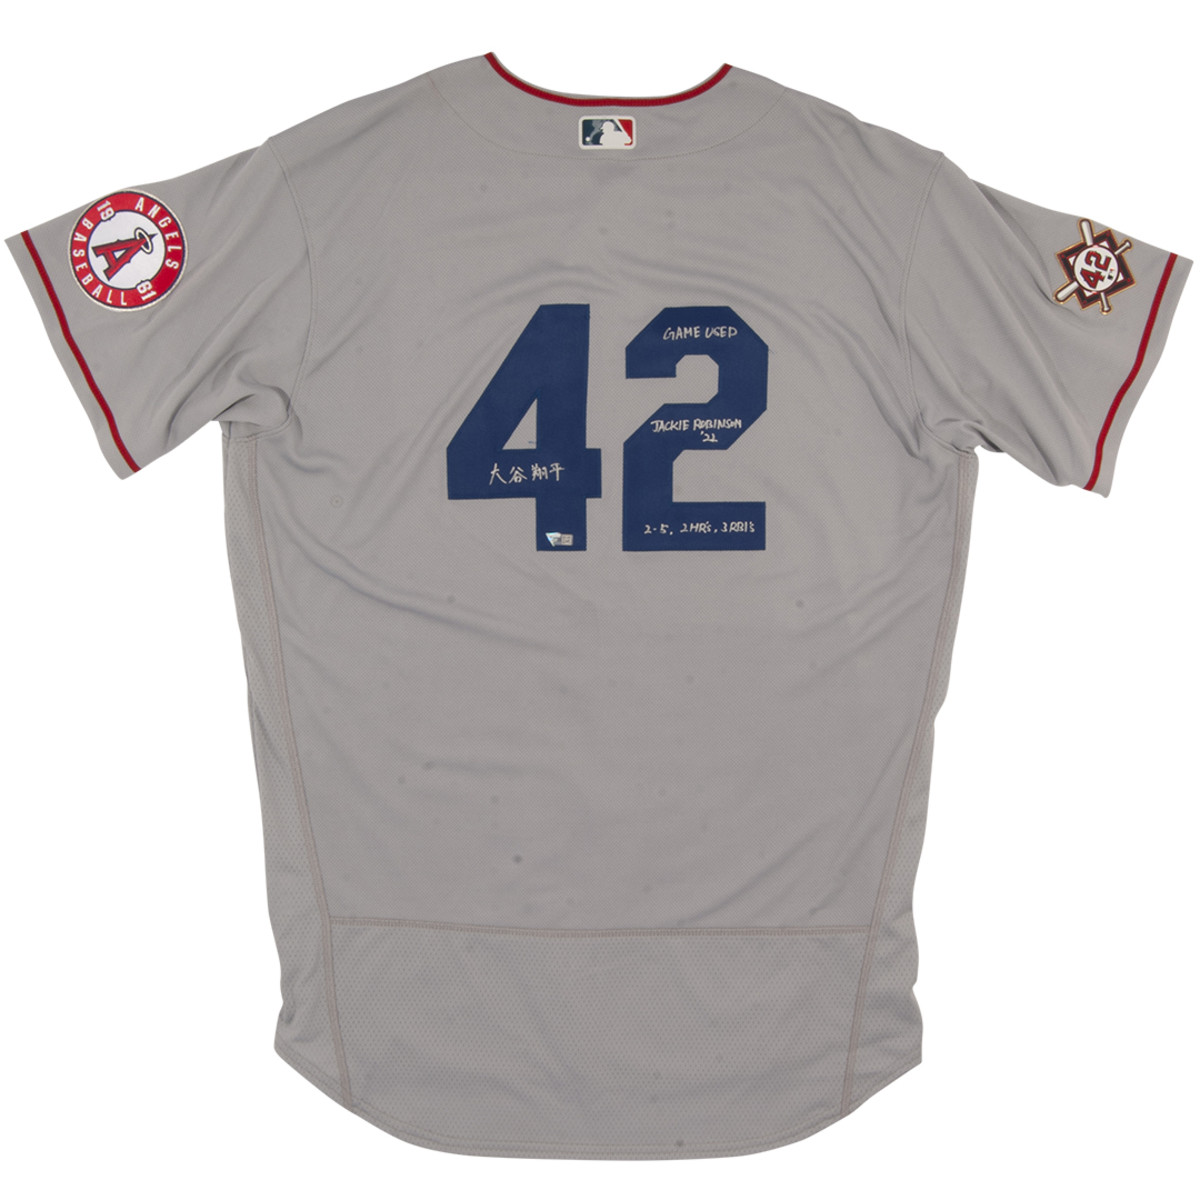 Signed and inscribed jersey Shohei Ohtani wore on Jackie Robinson Day in 2022.